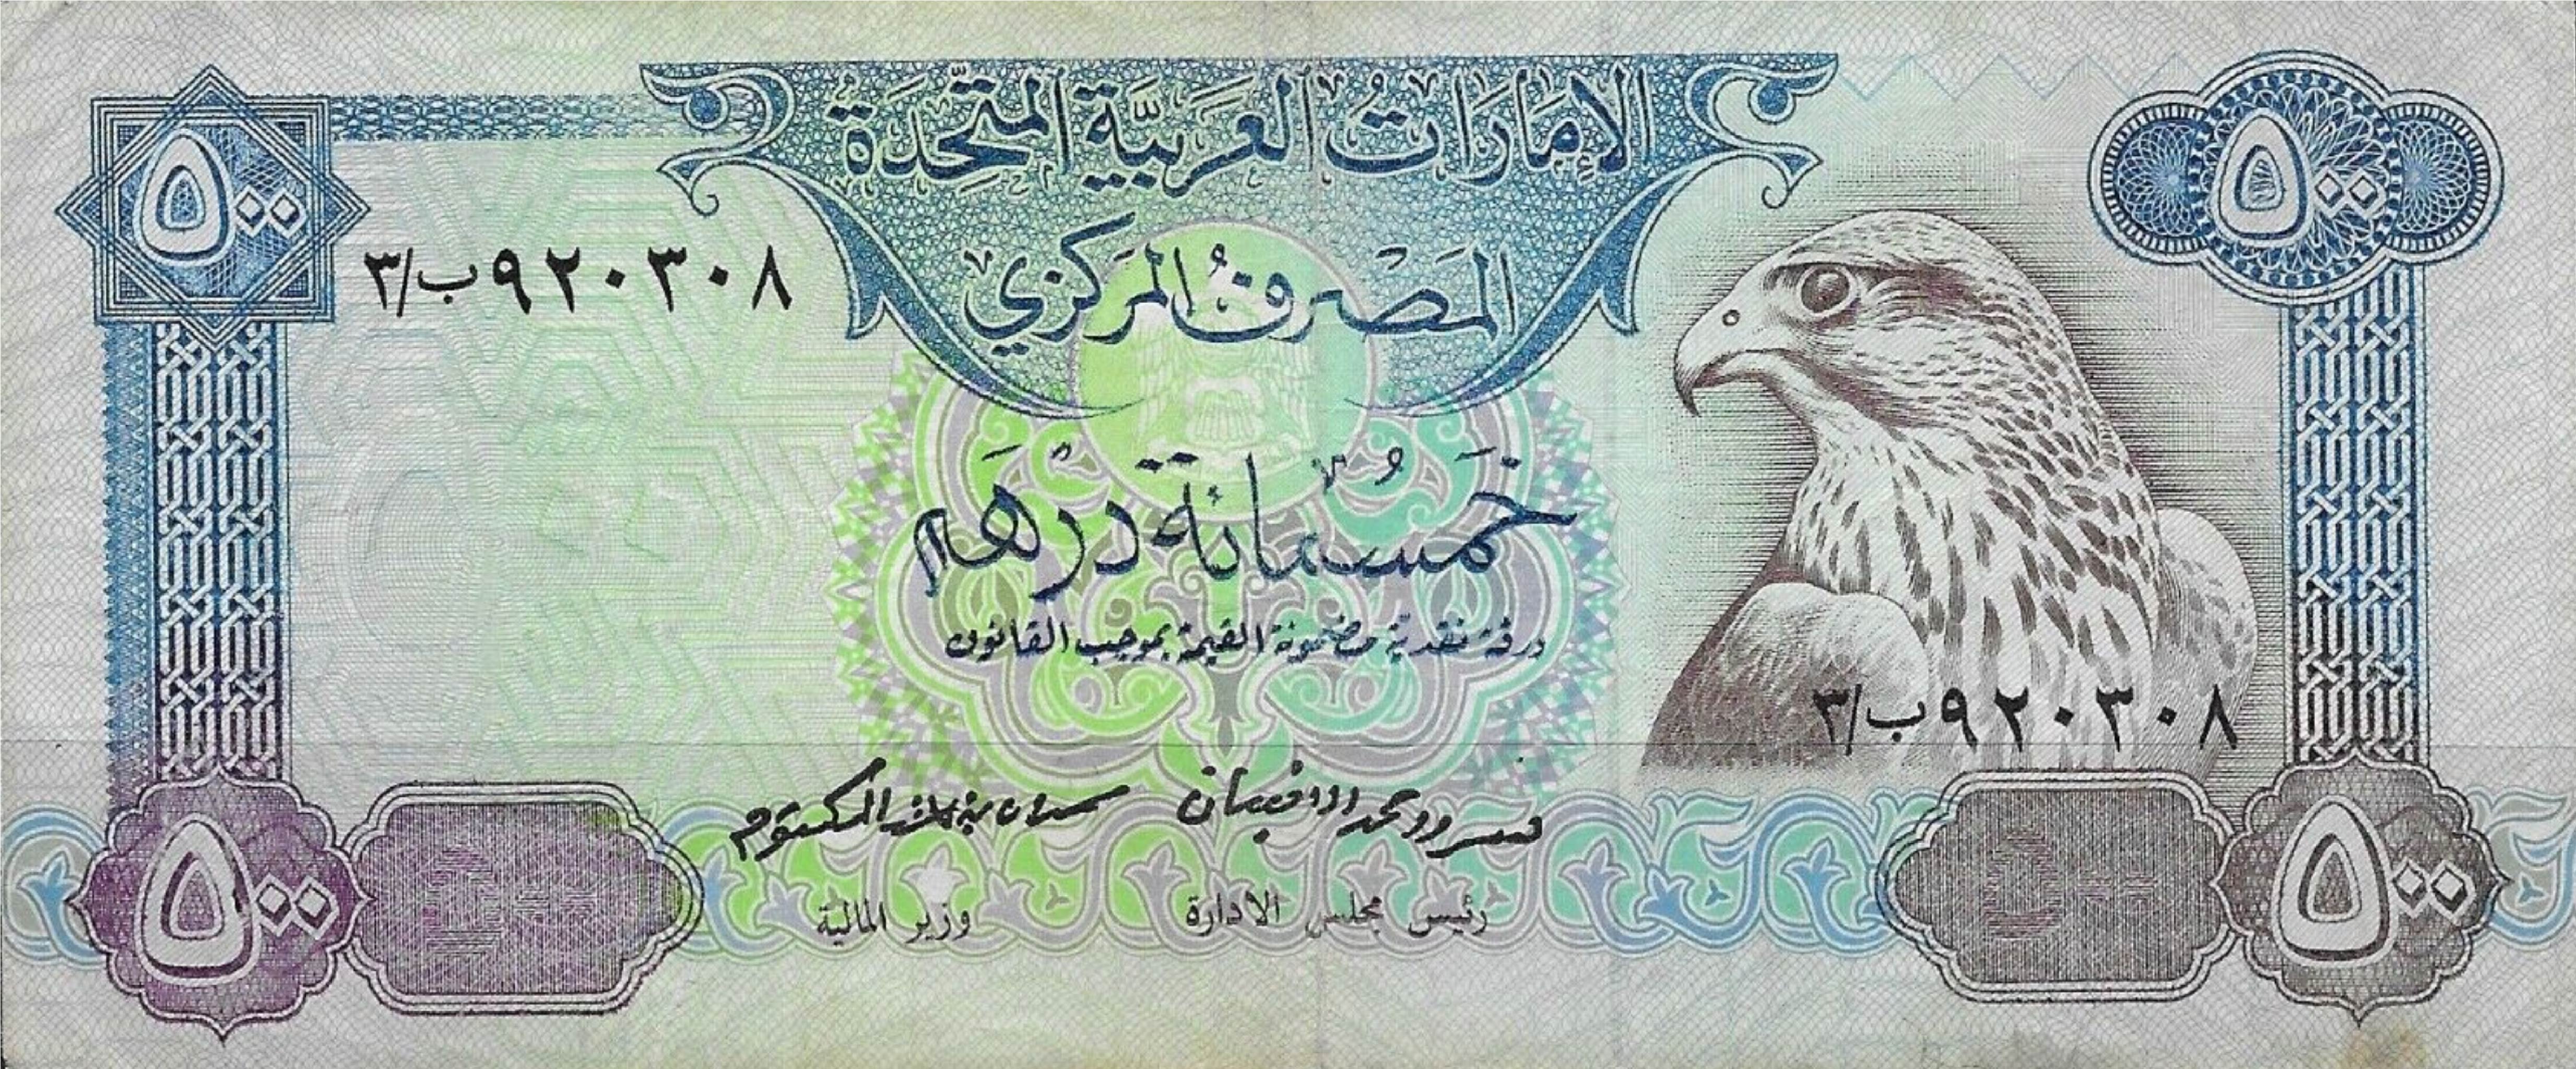 500-uae-dirhams-banknote-no-date-exchange-yours-for-cash-today